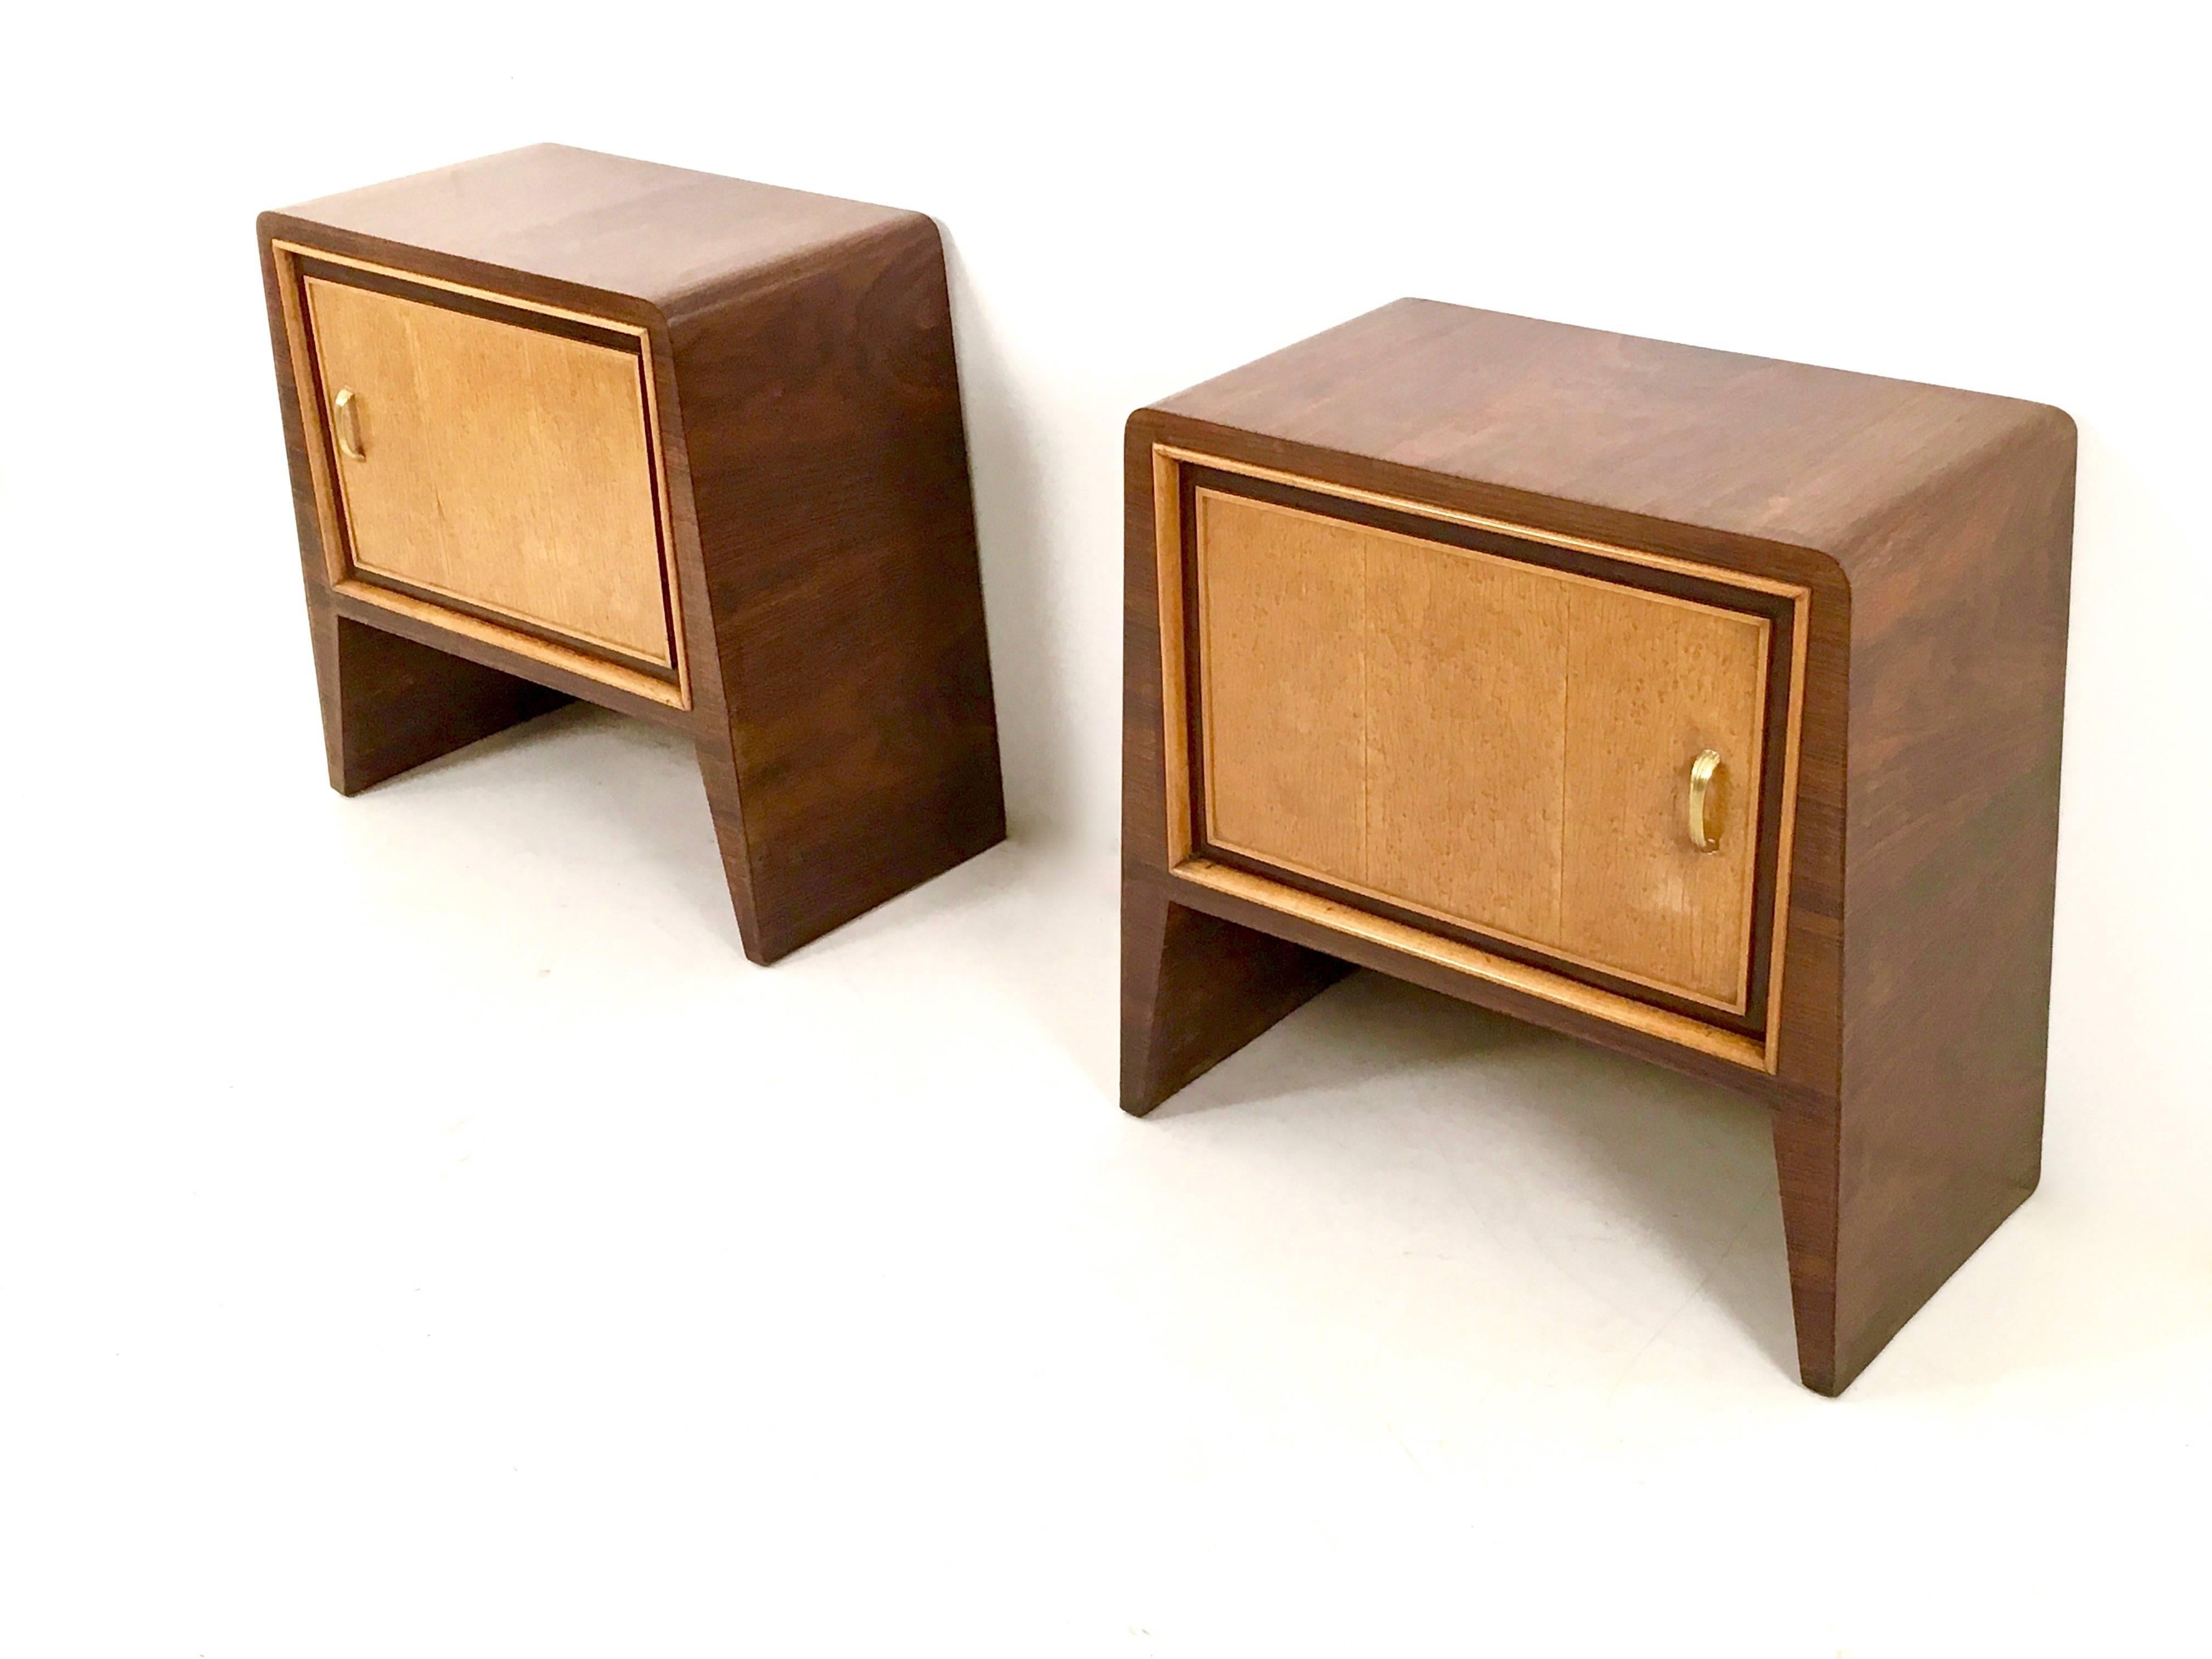 Italian Pair of Stunning Nightstands by Guglielmo Ulrich, Italy, 1930s-1940s